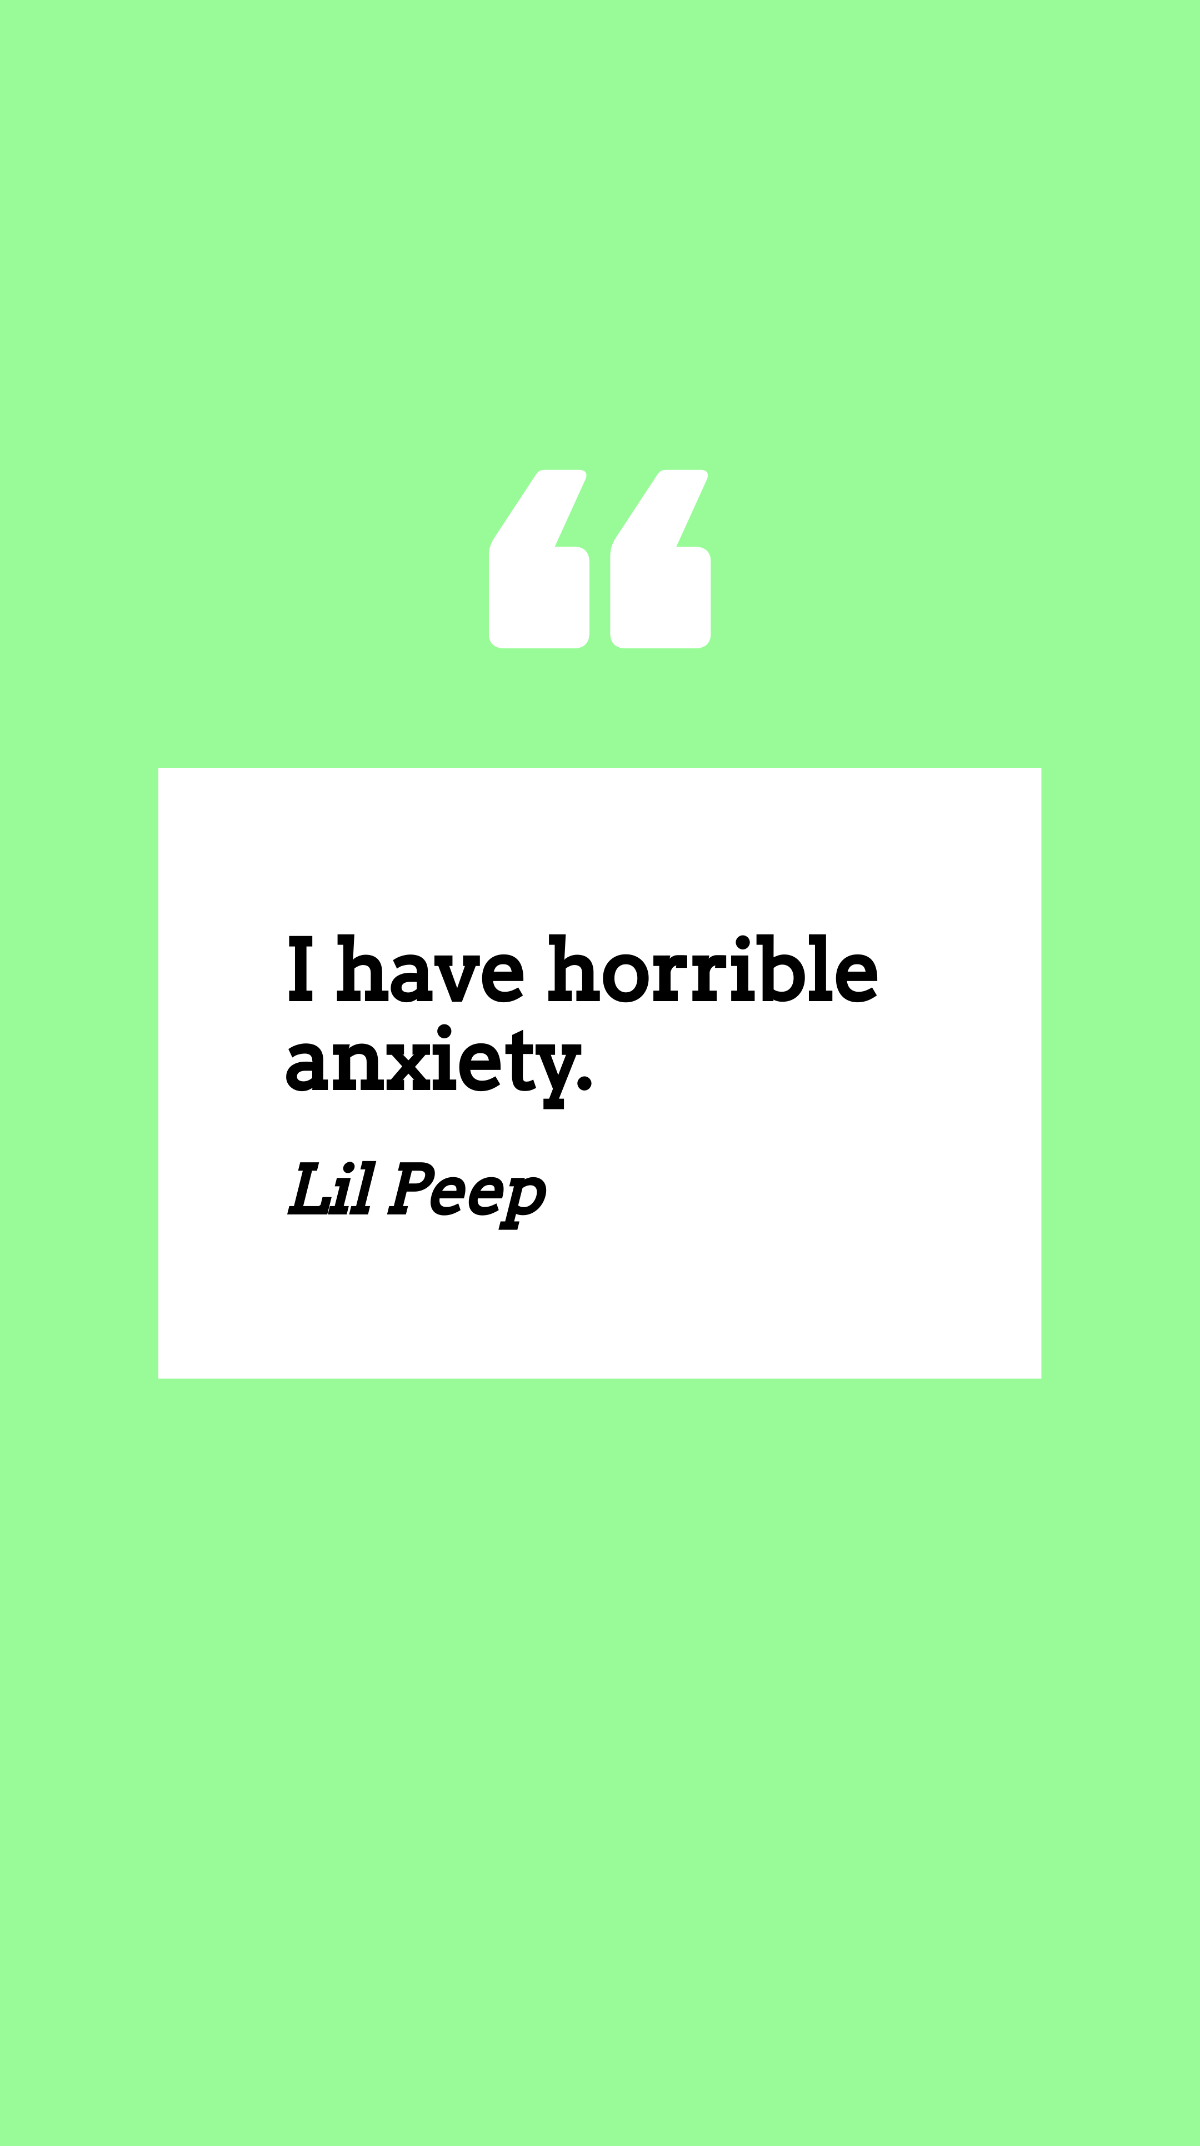 Lil Peep - I have horrible anxiety. Template